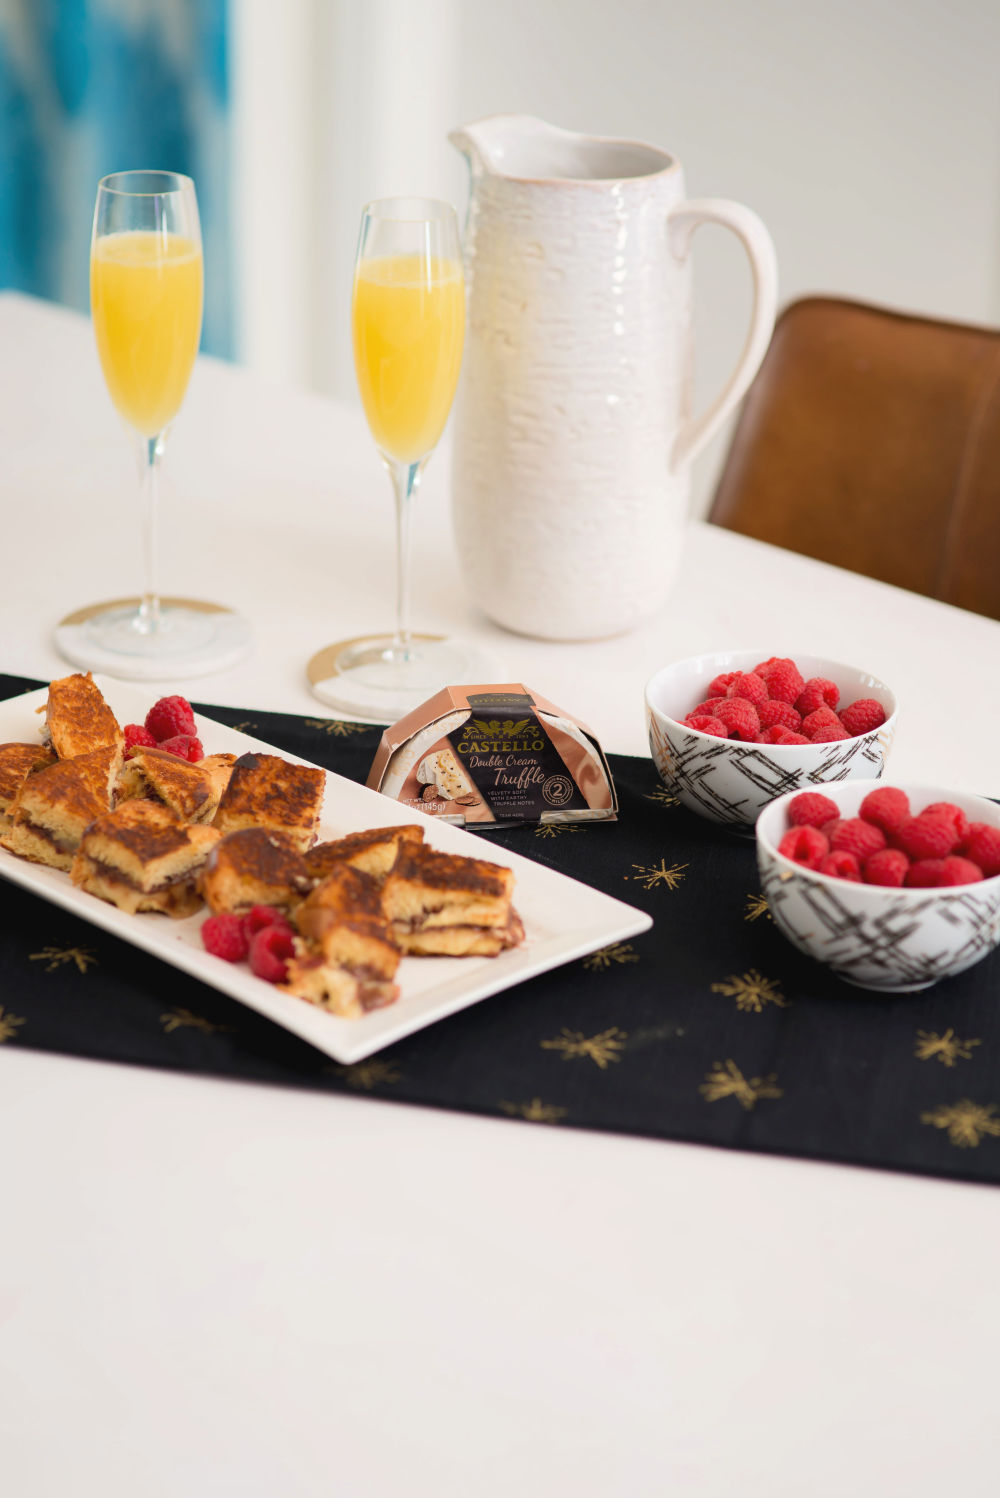 perfect for brunch in bite size pieces! #brunch #holiday #recipes #brunchrecipes | Castello Cheese | Foodie | Nutella & Raspberry Stuffed Grilled Cheese featured by top Florida lifestyle blog The Modern Savvy